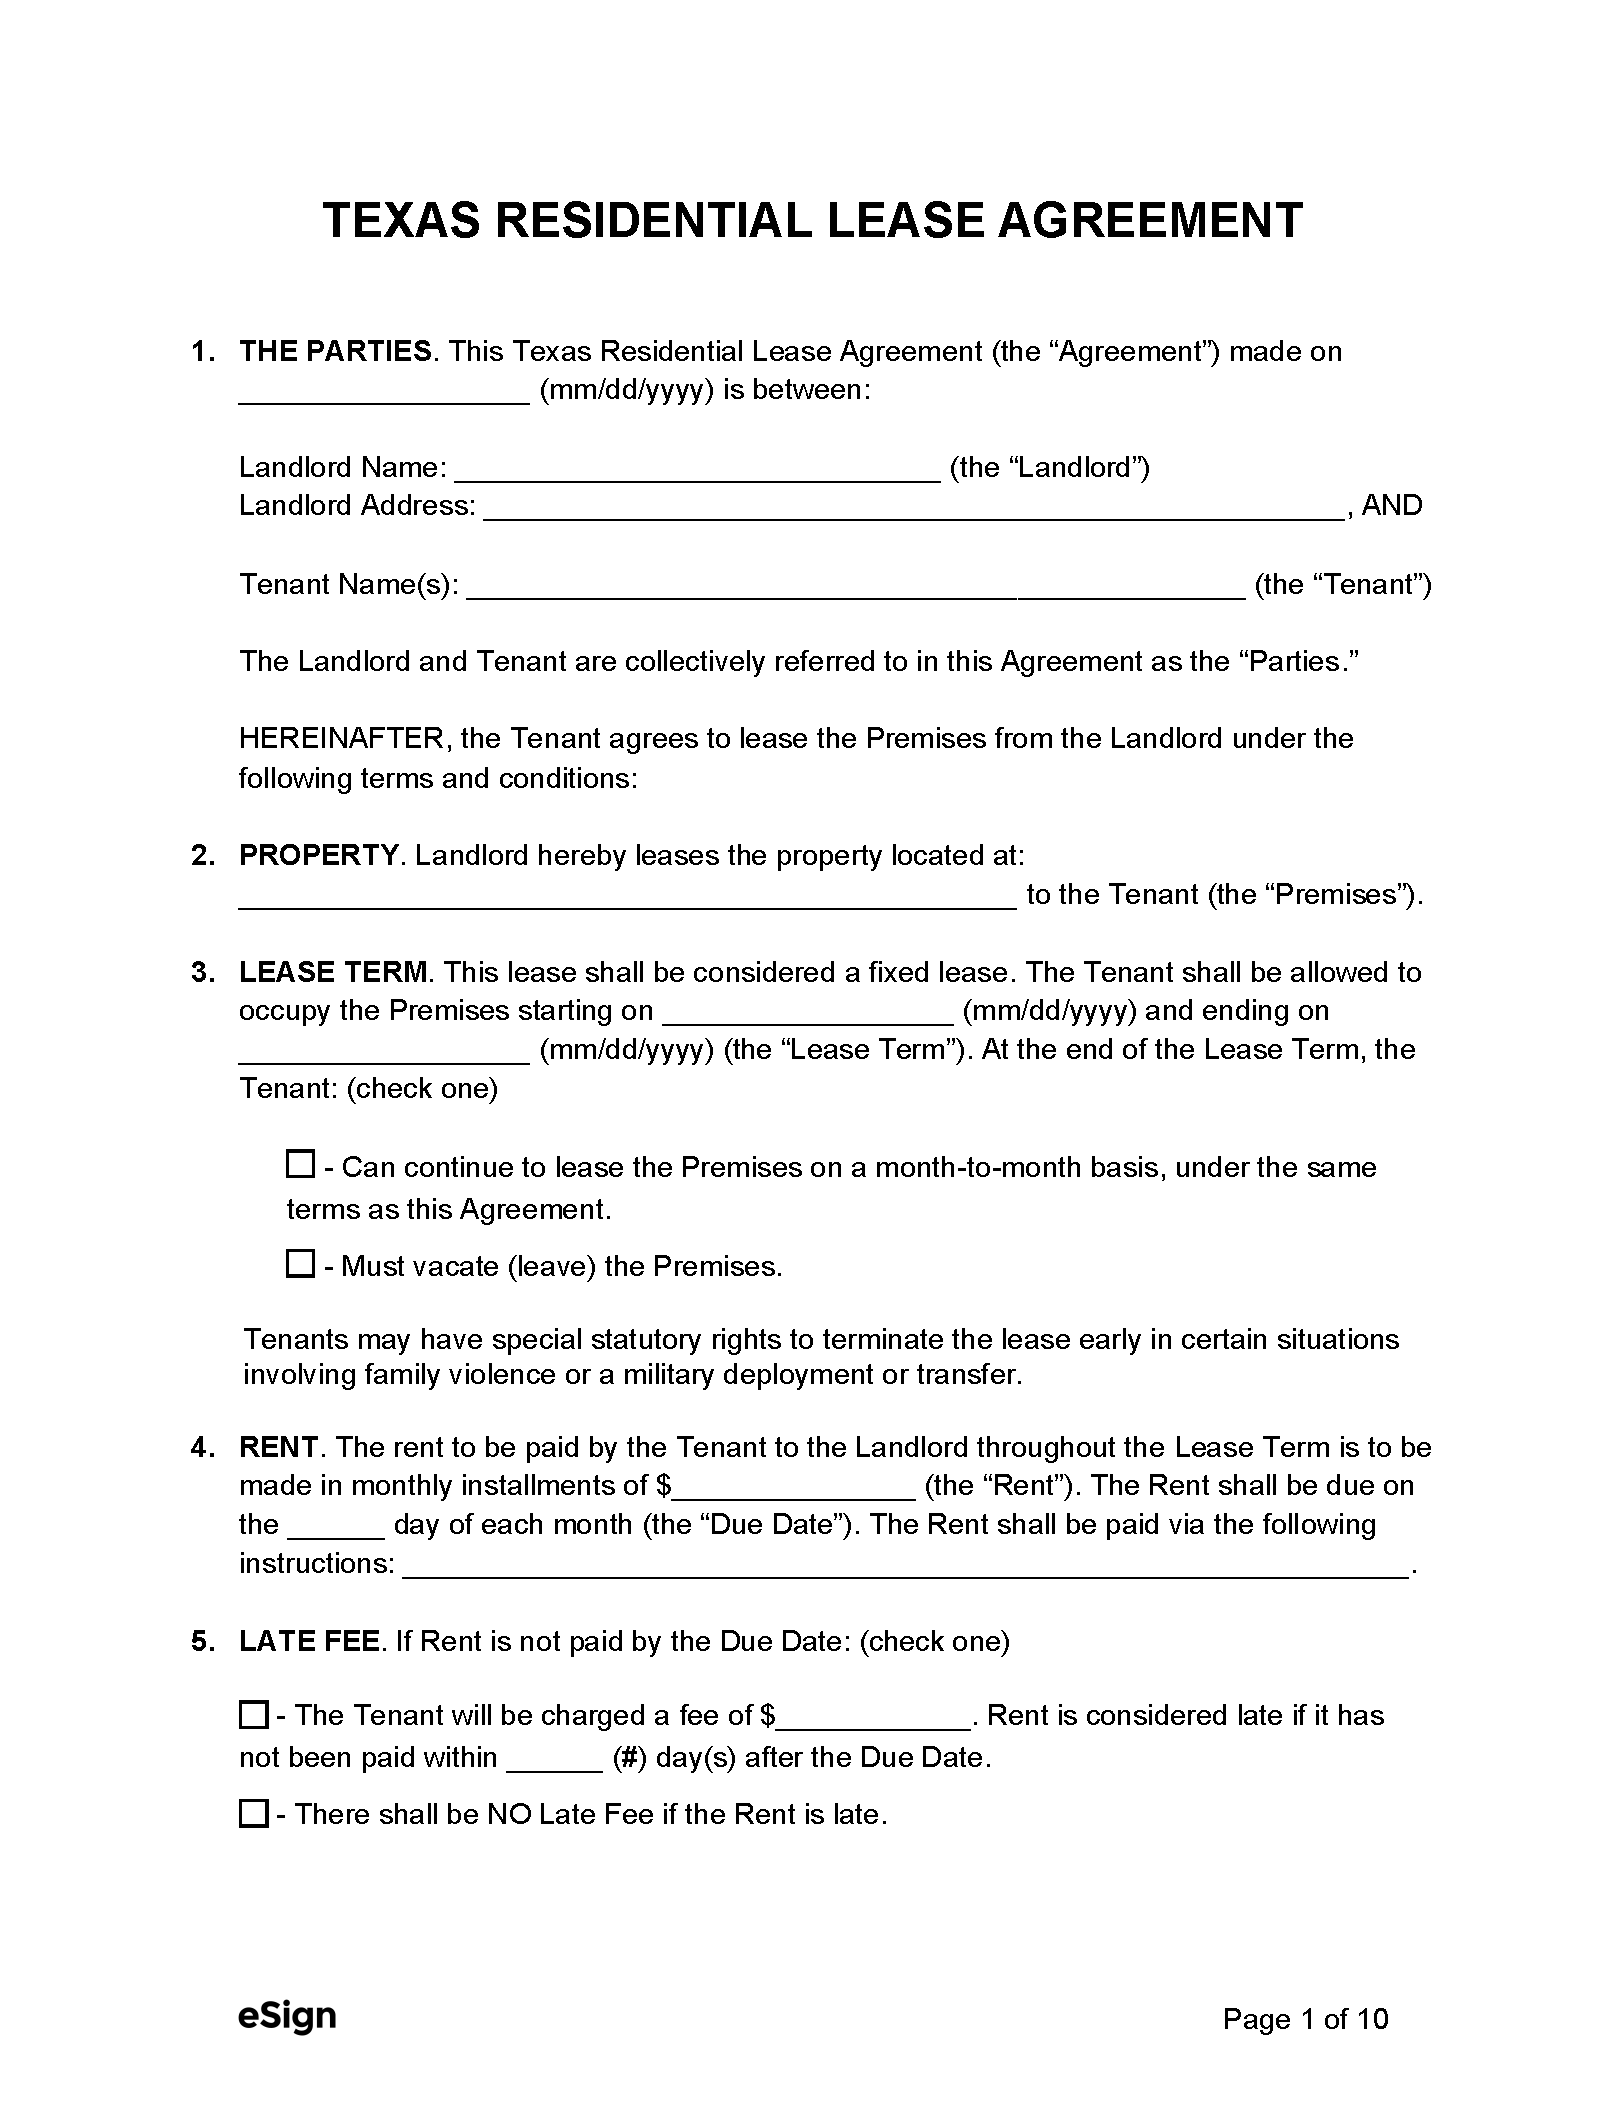 Texas Association Of Realtors Residential Lease Agreement Fillable Form Printable Form 